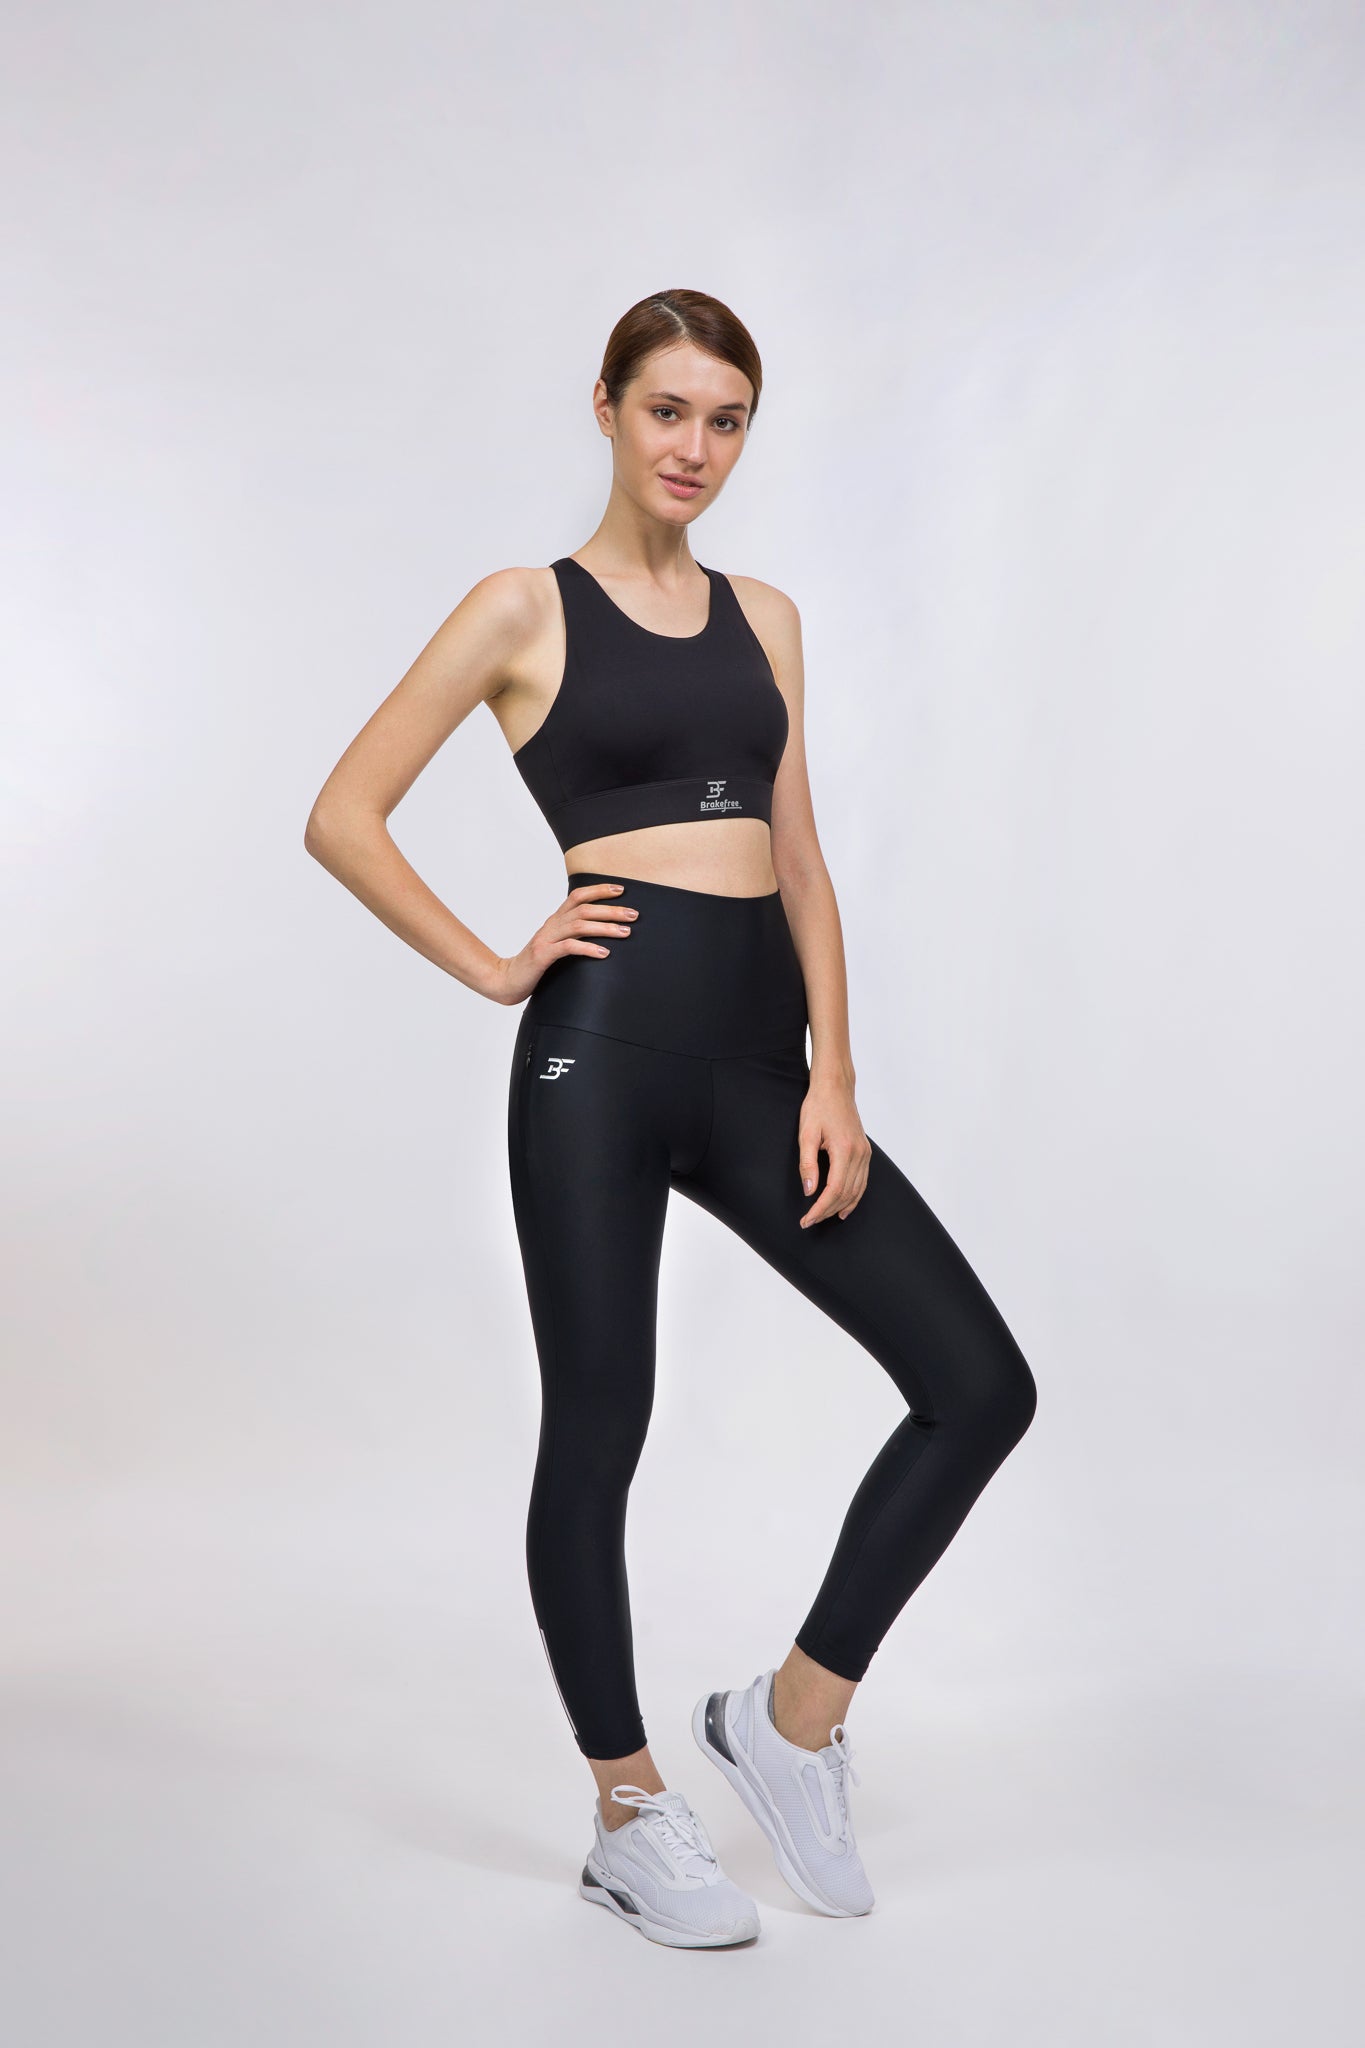 Buy DREAM SLIM No-Bounce High-Impact Support Band Extra Sports Bras for Women  Adjustable Straps Online at desertcartINDIA